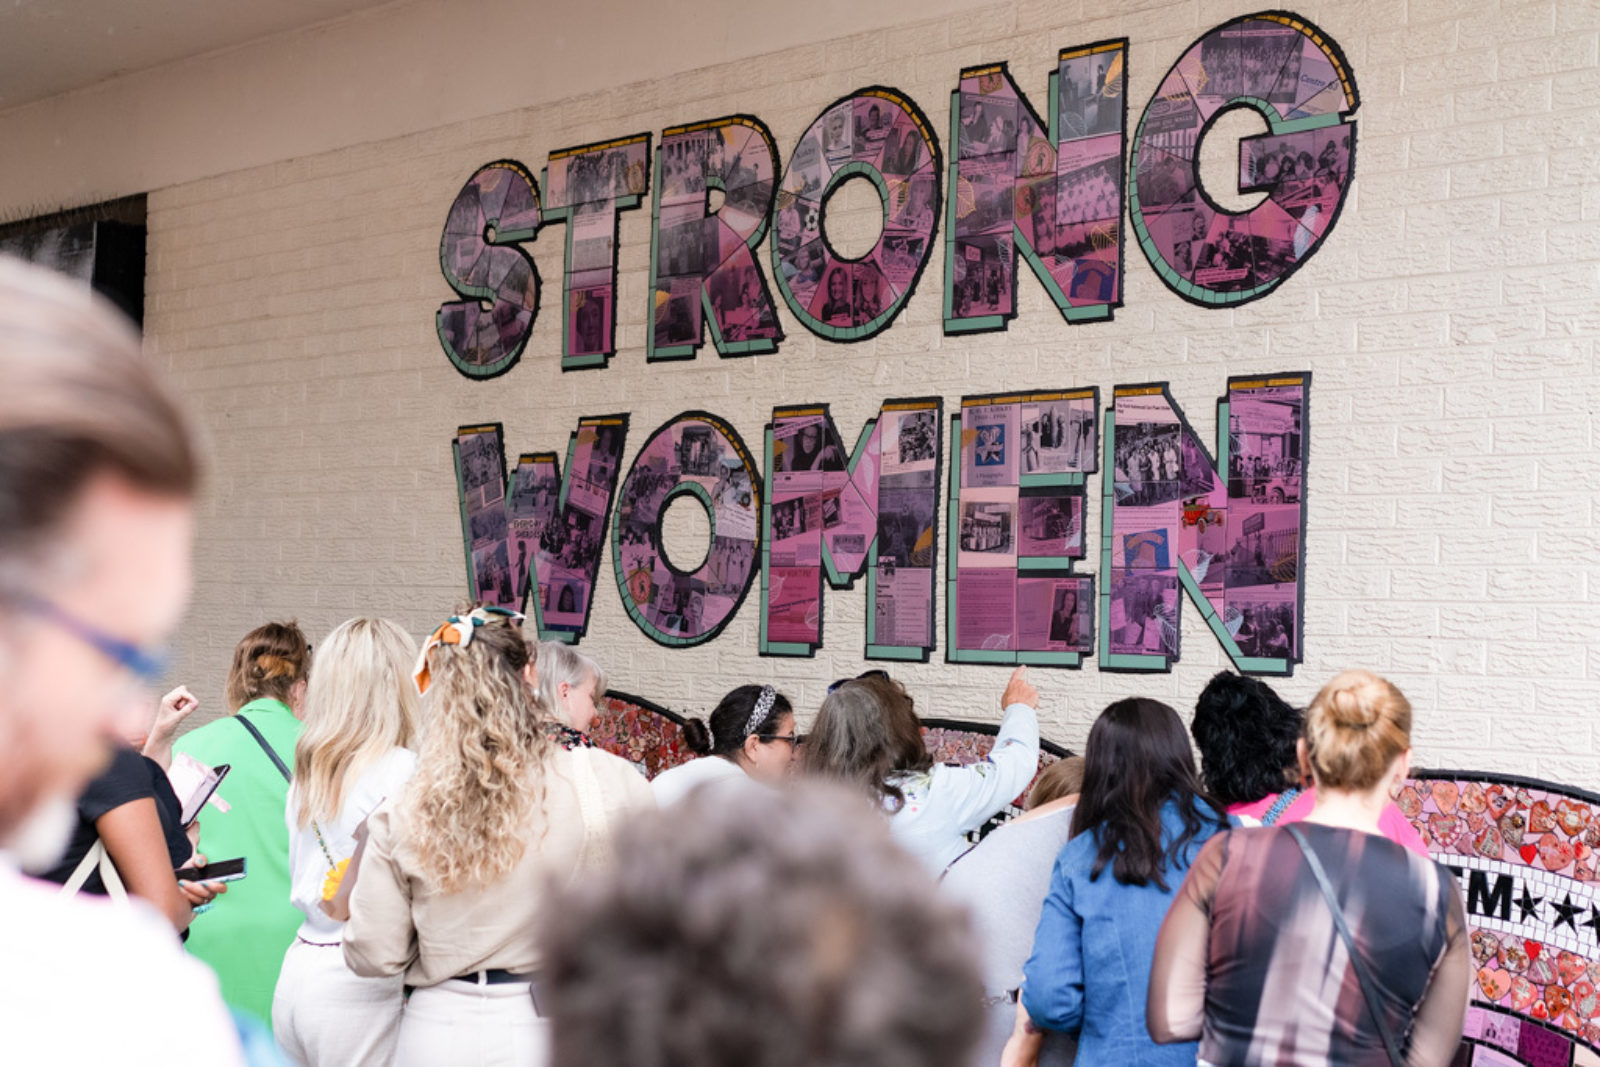 A crowd of women crowd around the mural, pointing at the strong Women of Knowsley Mural and taking photos.